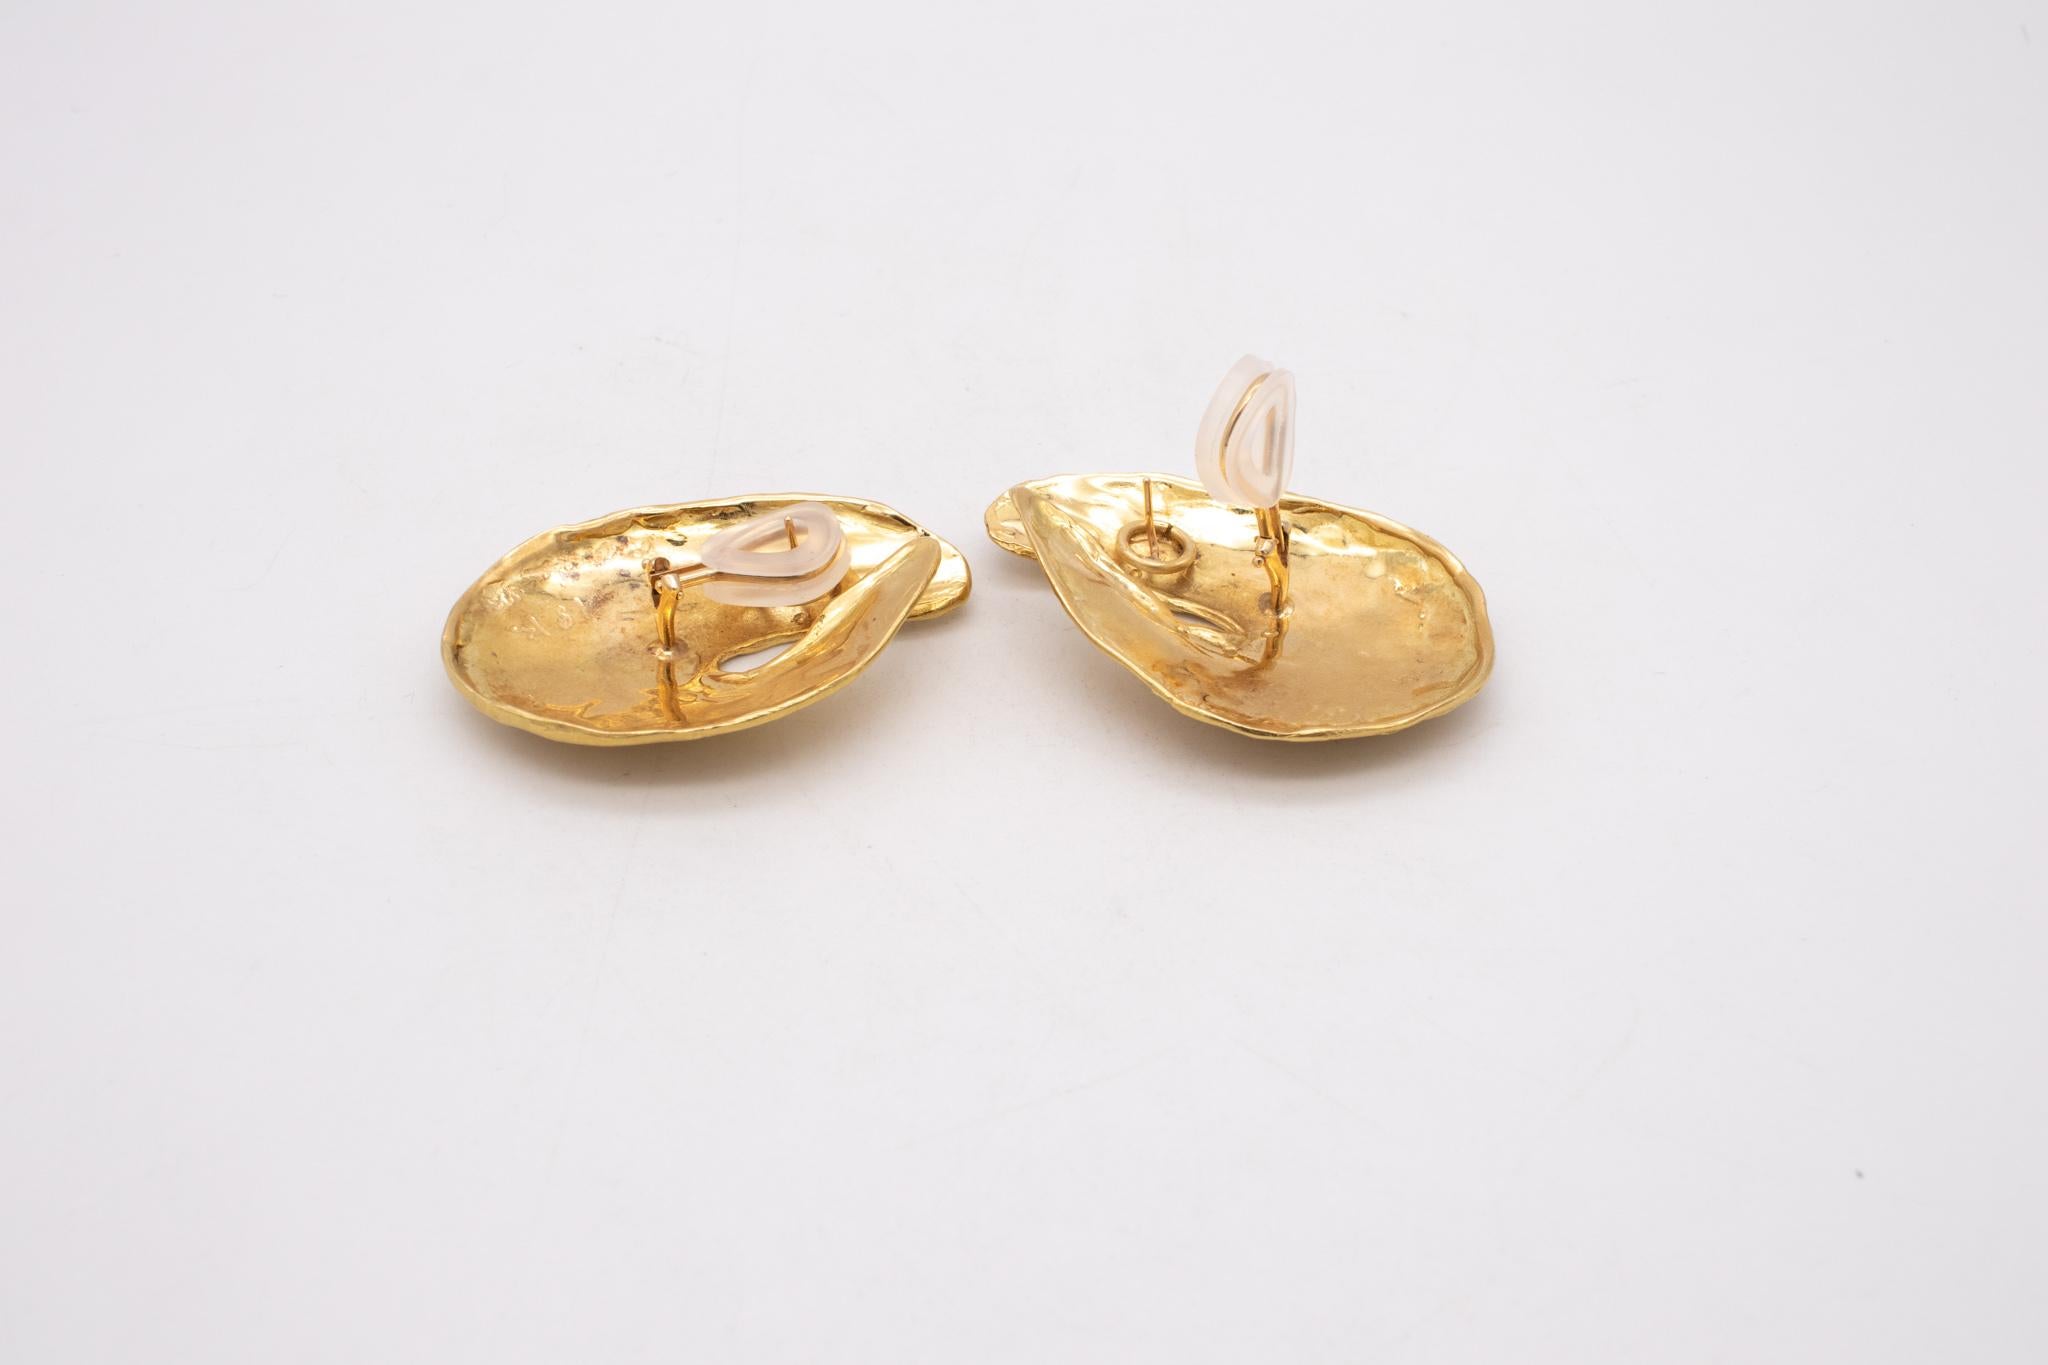 Modernist Retro Vintage 1970 Free Form Earrings in Textured 18Kt Yellow Gold 1